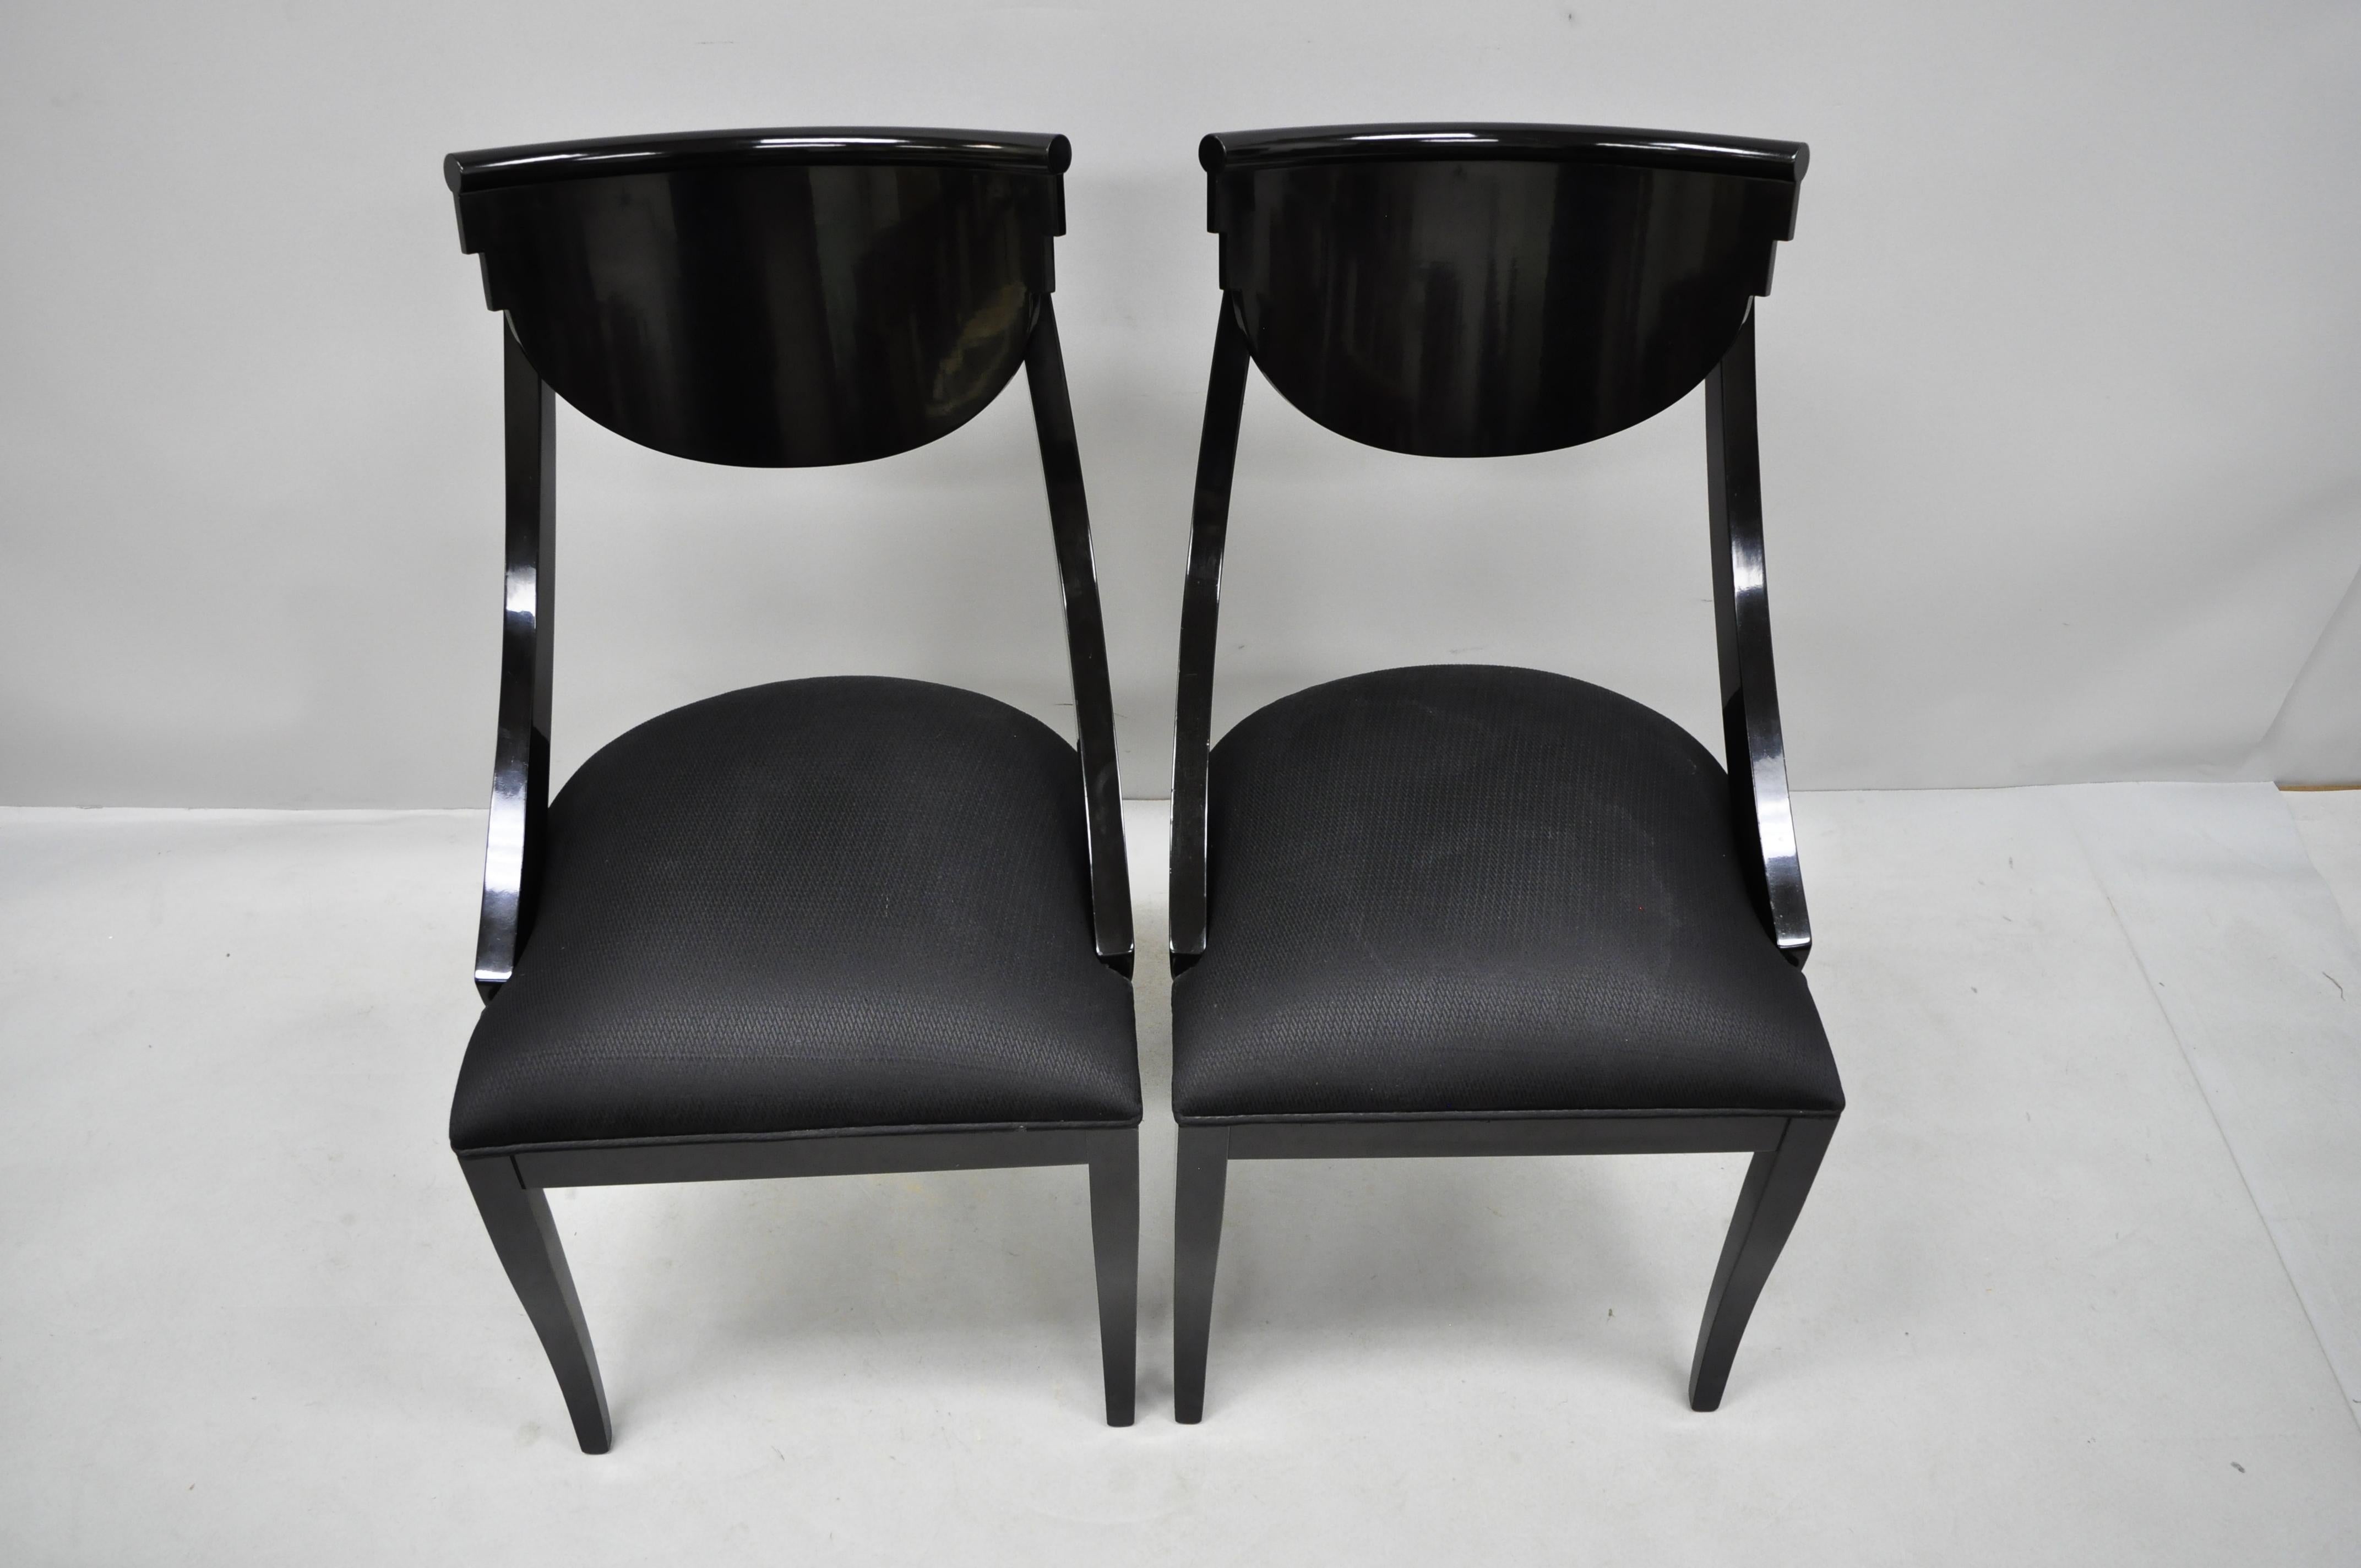 Wood Pair of Black Lacquer Italian Hollywood Regency Side Chairs by Pietro Costantini